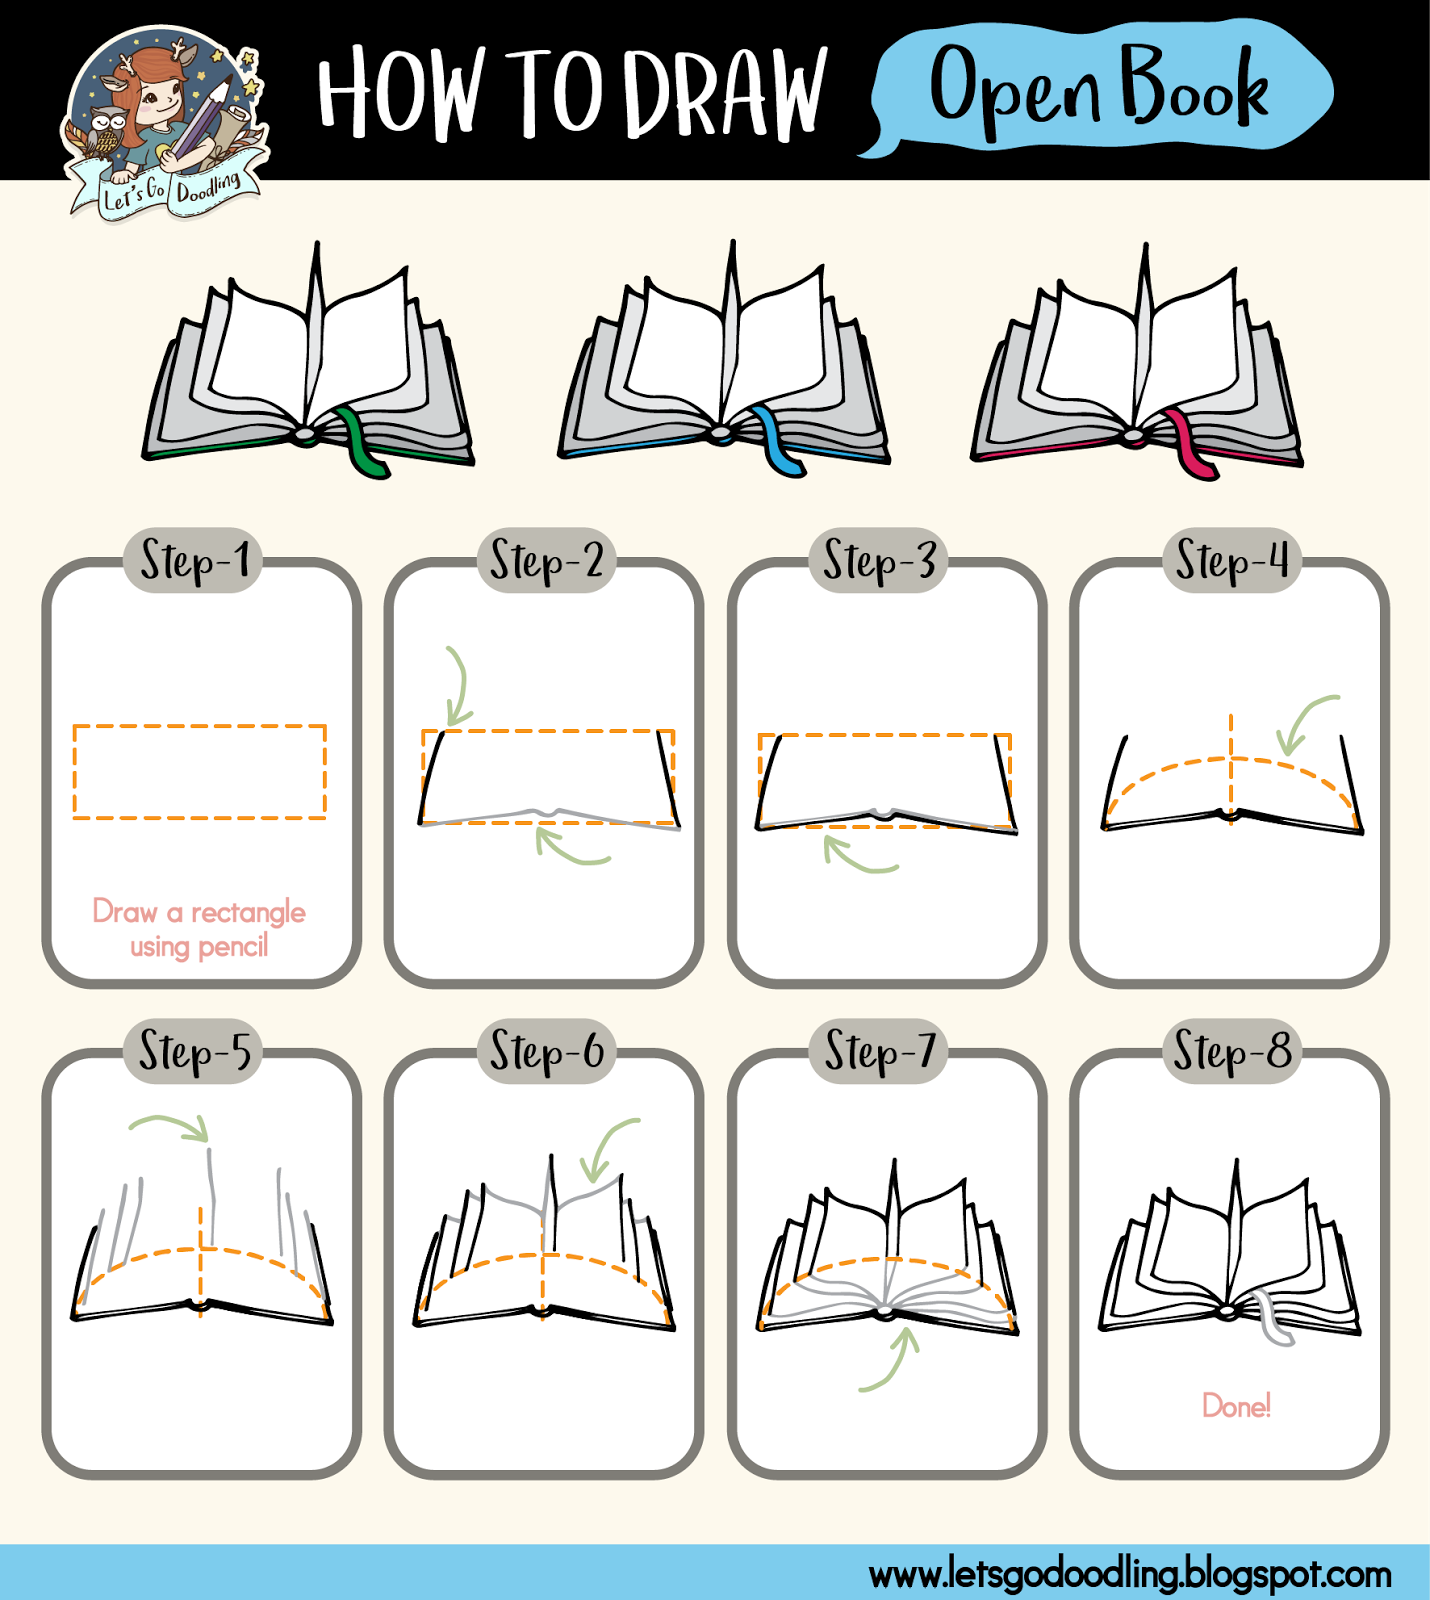 How to Draw a Book 📖 (opened or closed) - Easy step by step